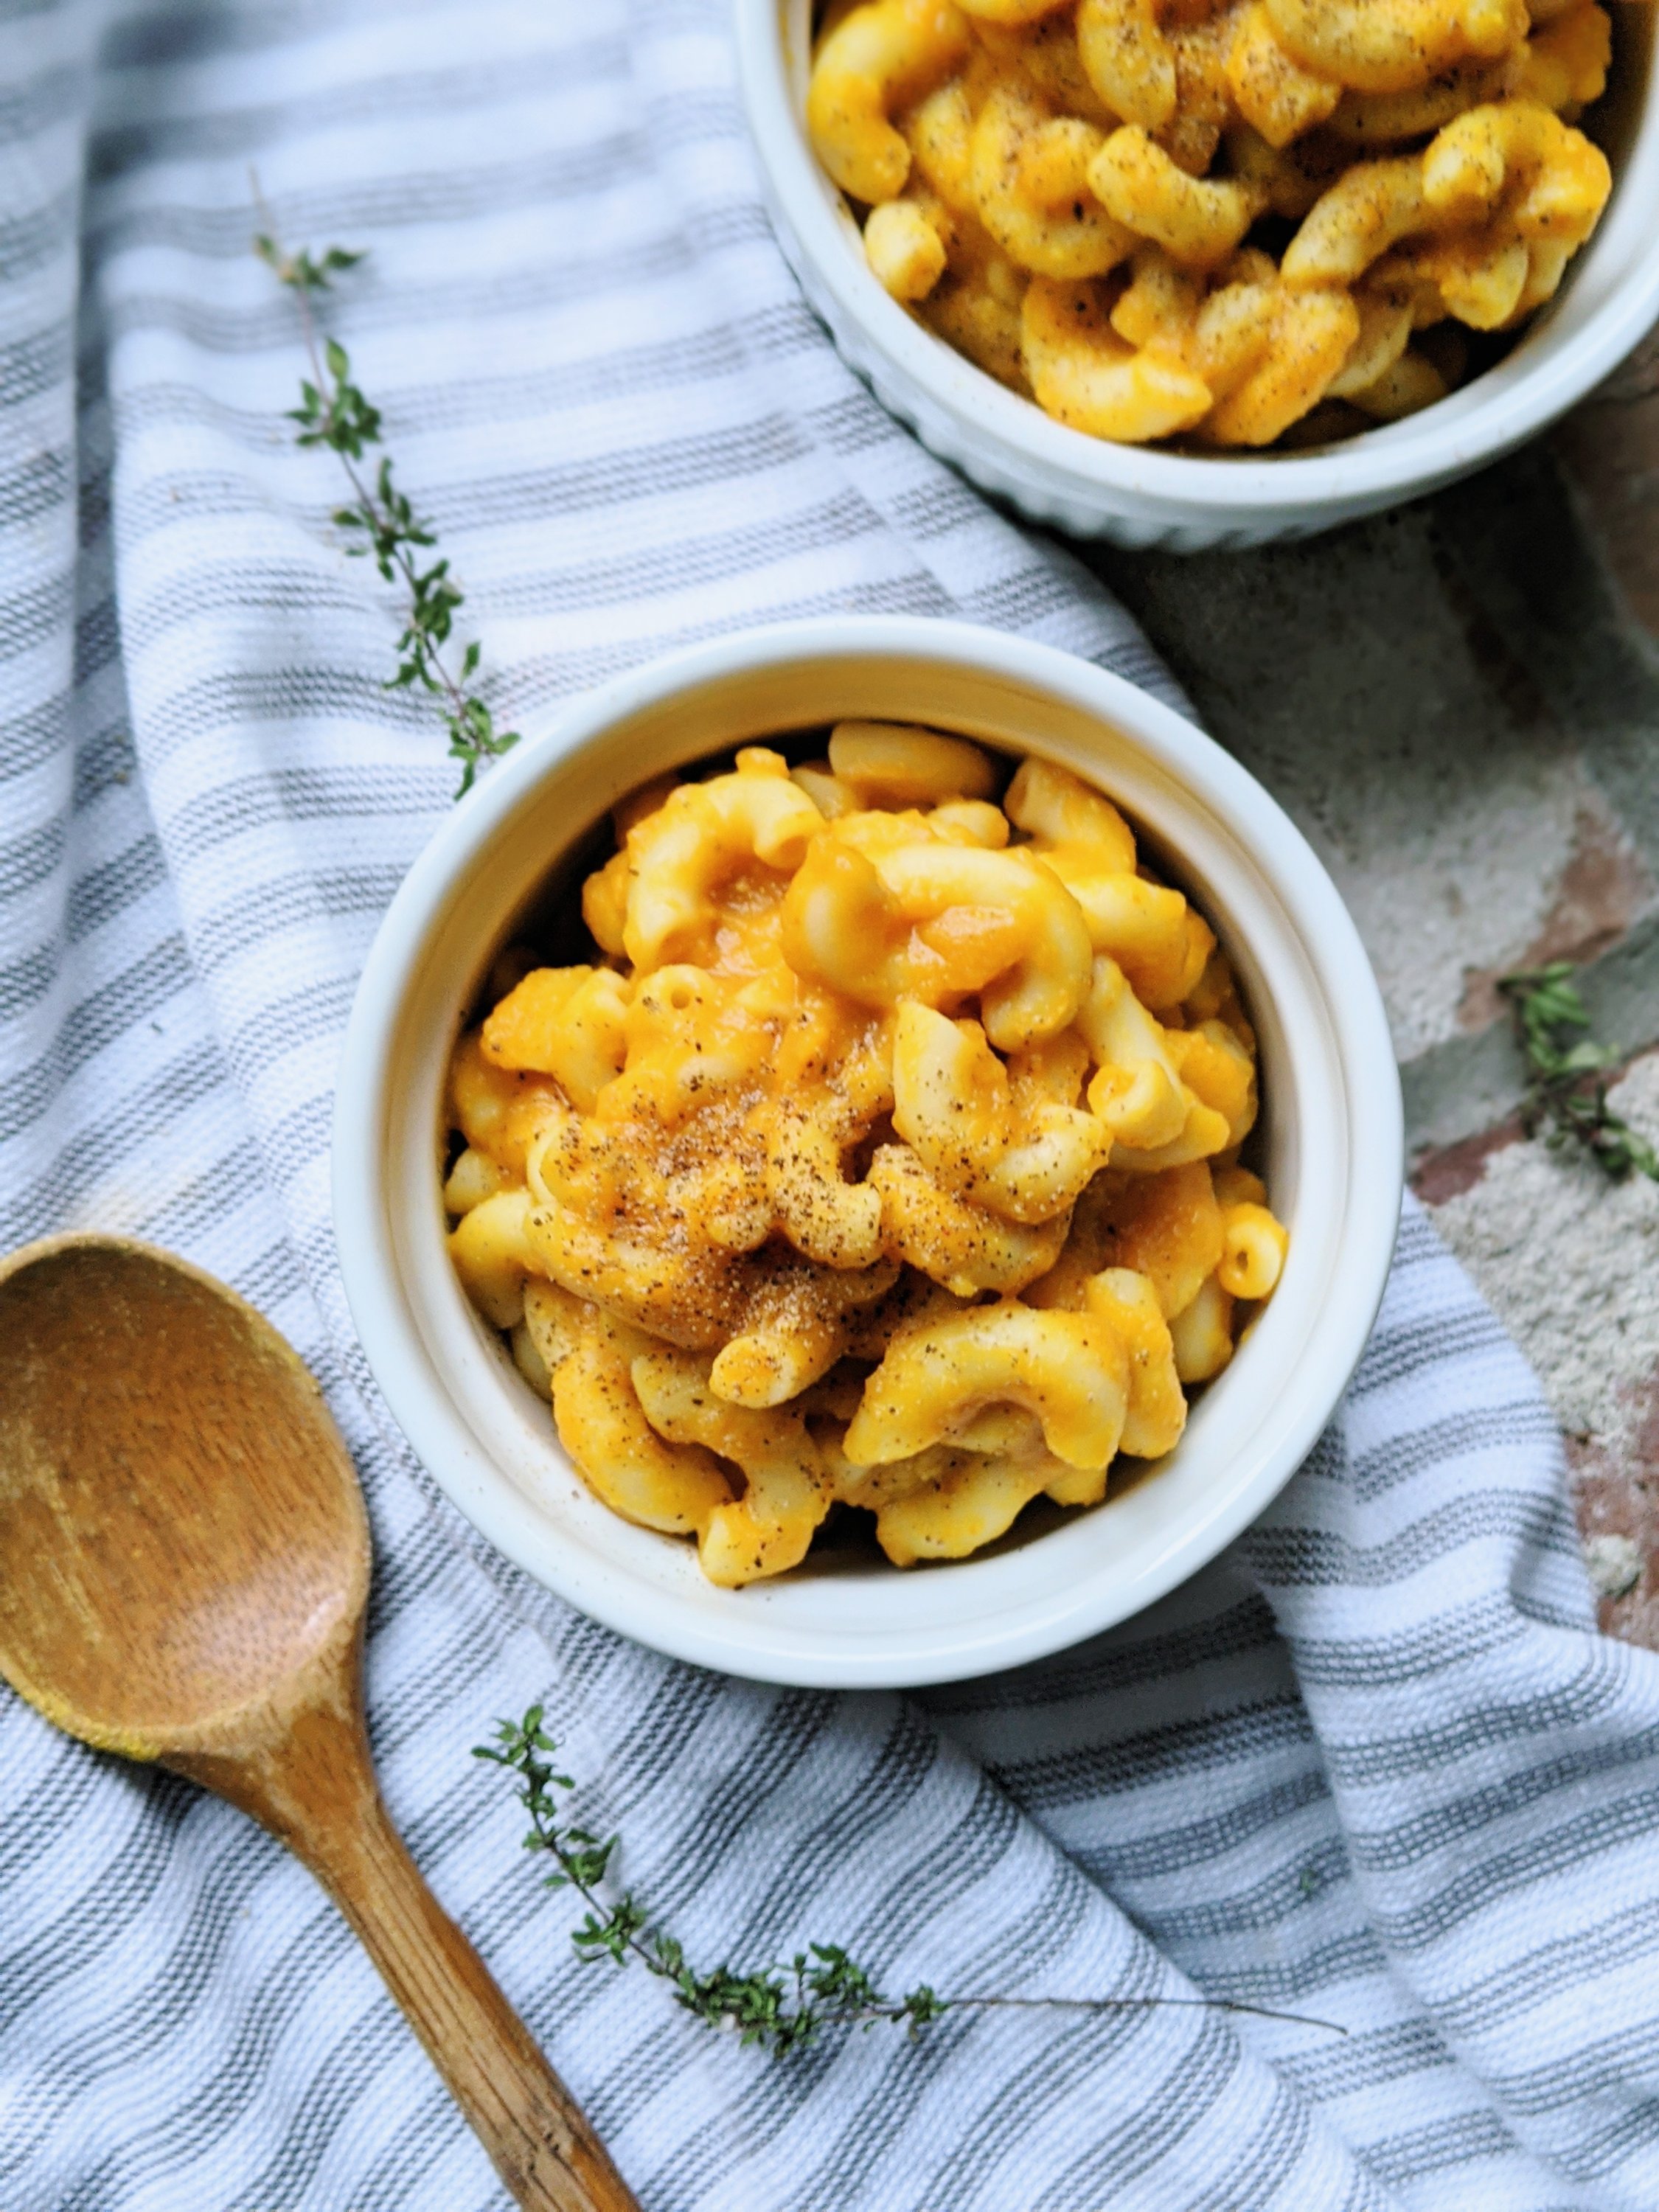 oat milk mac and cheese recipes with vegetables pumpkin butternut squash healthy vegan gluten free baked macaroni one pot make ahead dinners for family weeknight meals suppers